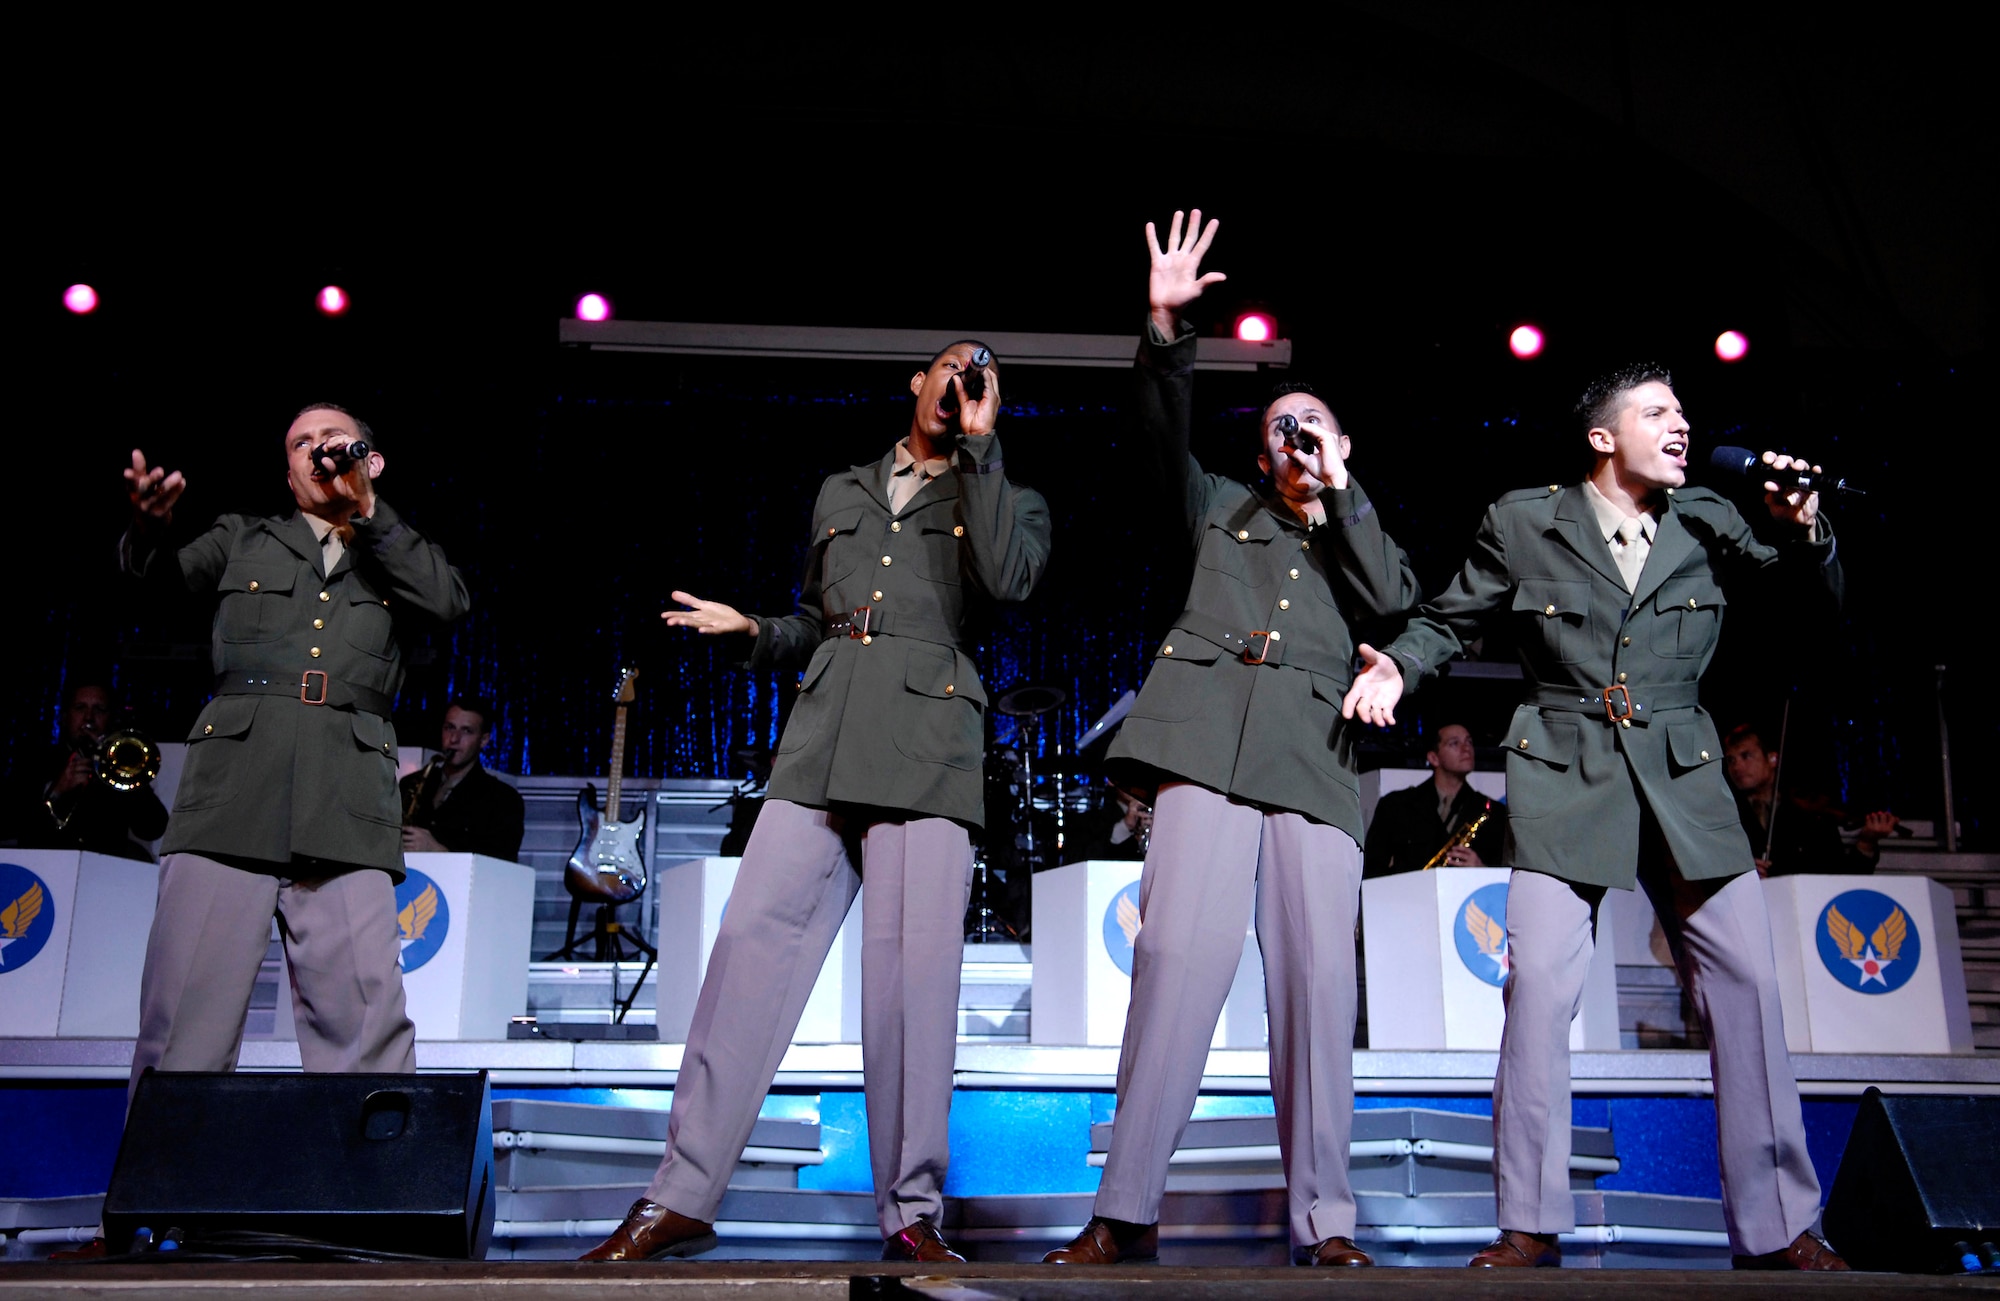 Tops In Blue performs Sept. 12 at the Waikiki Shell in Honolulu. The Air Force's signature entertainment group gave a free performance for the public to celebrate Air Force Week Honolulu and the Air Force's 60th anniversary. (U.S. Air Force photo/Tech. Sgt. Shane A. Cuomo)